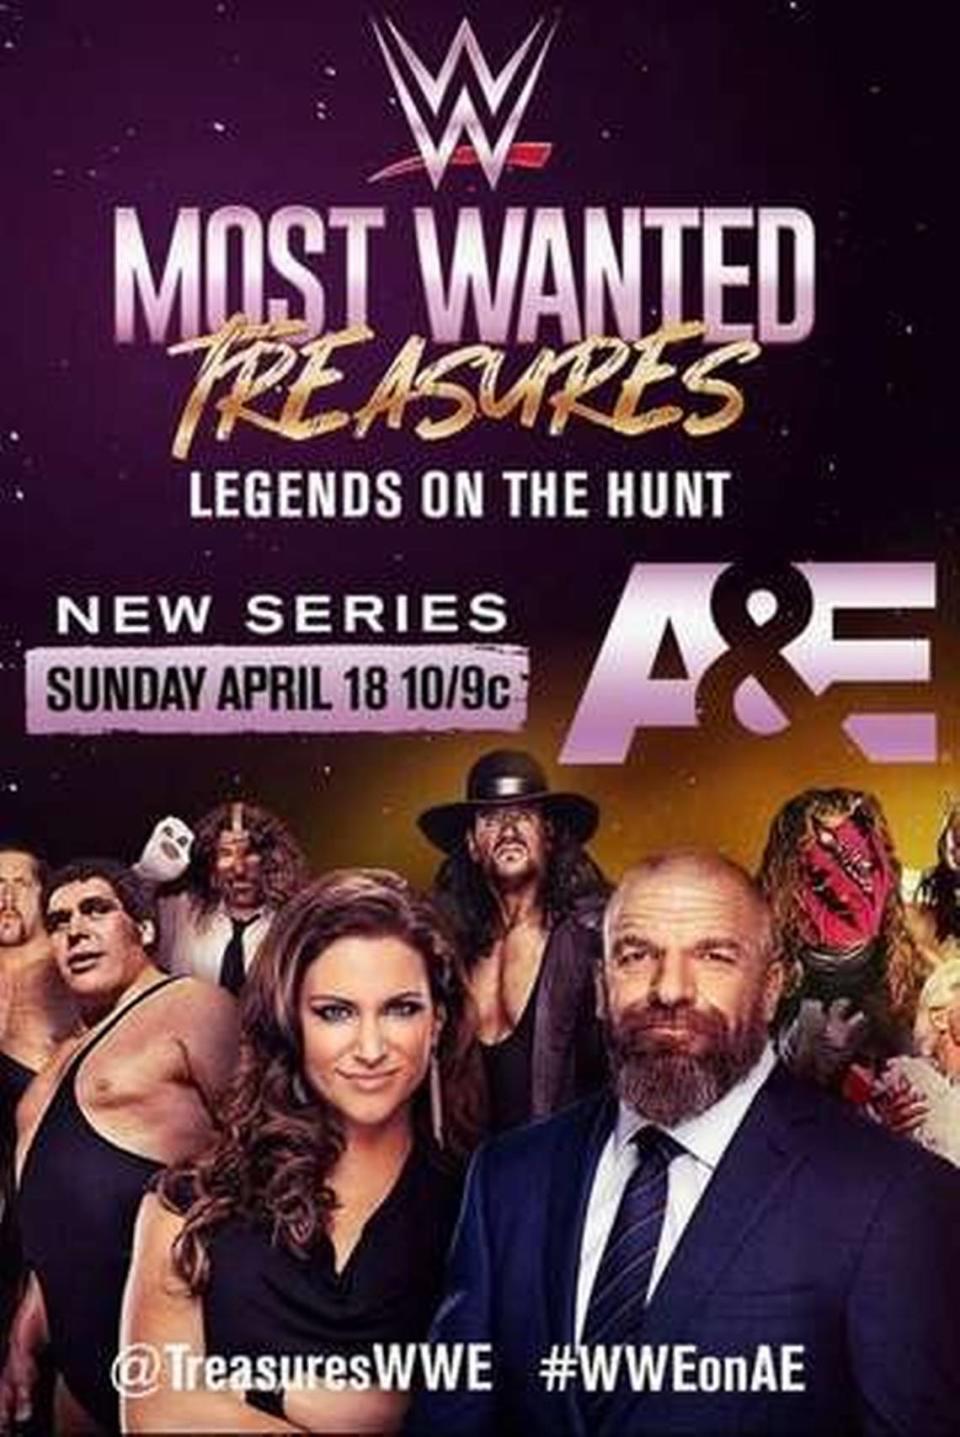 “WWE’s Most Wanted Treasures” with AJ Francis takes viewers on a journey to find some of WWE’s most iconic, lost memorabilia, and that journey begins April 18 on A&E.